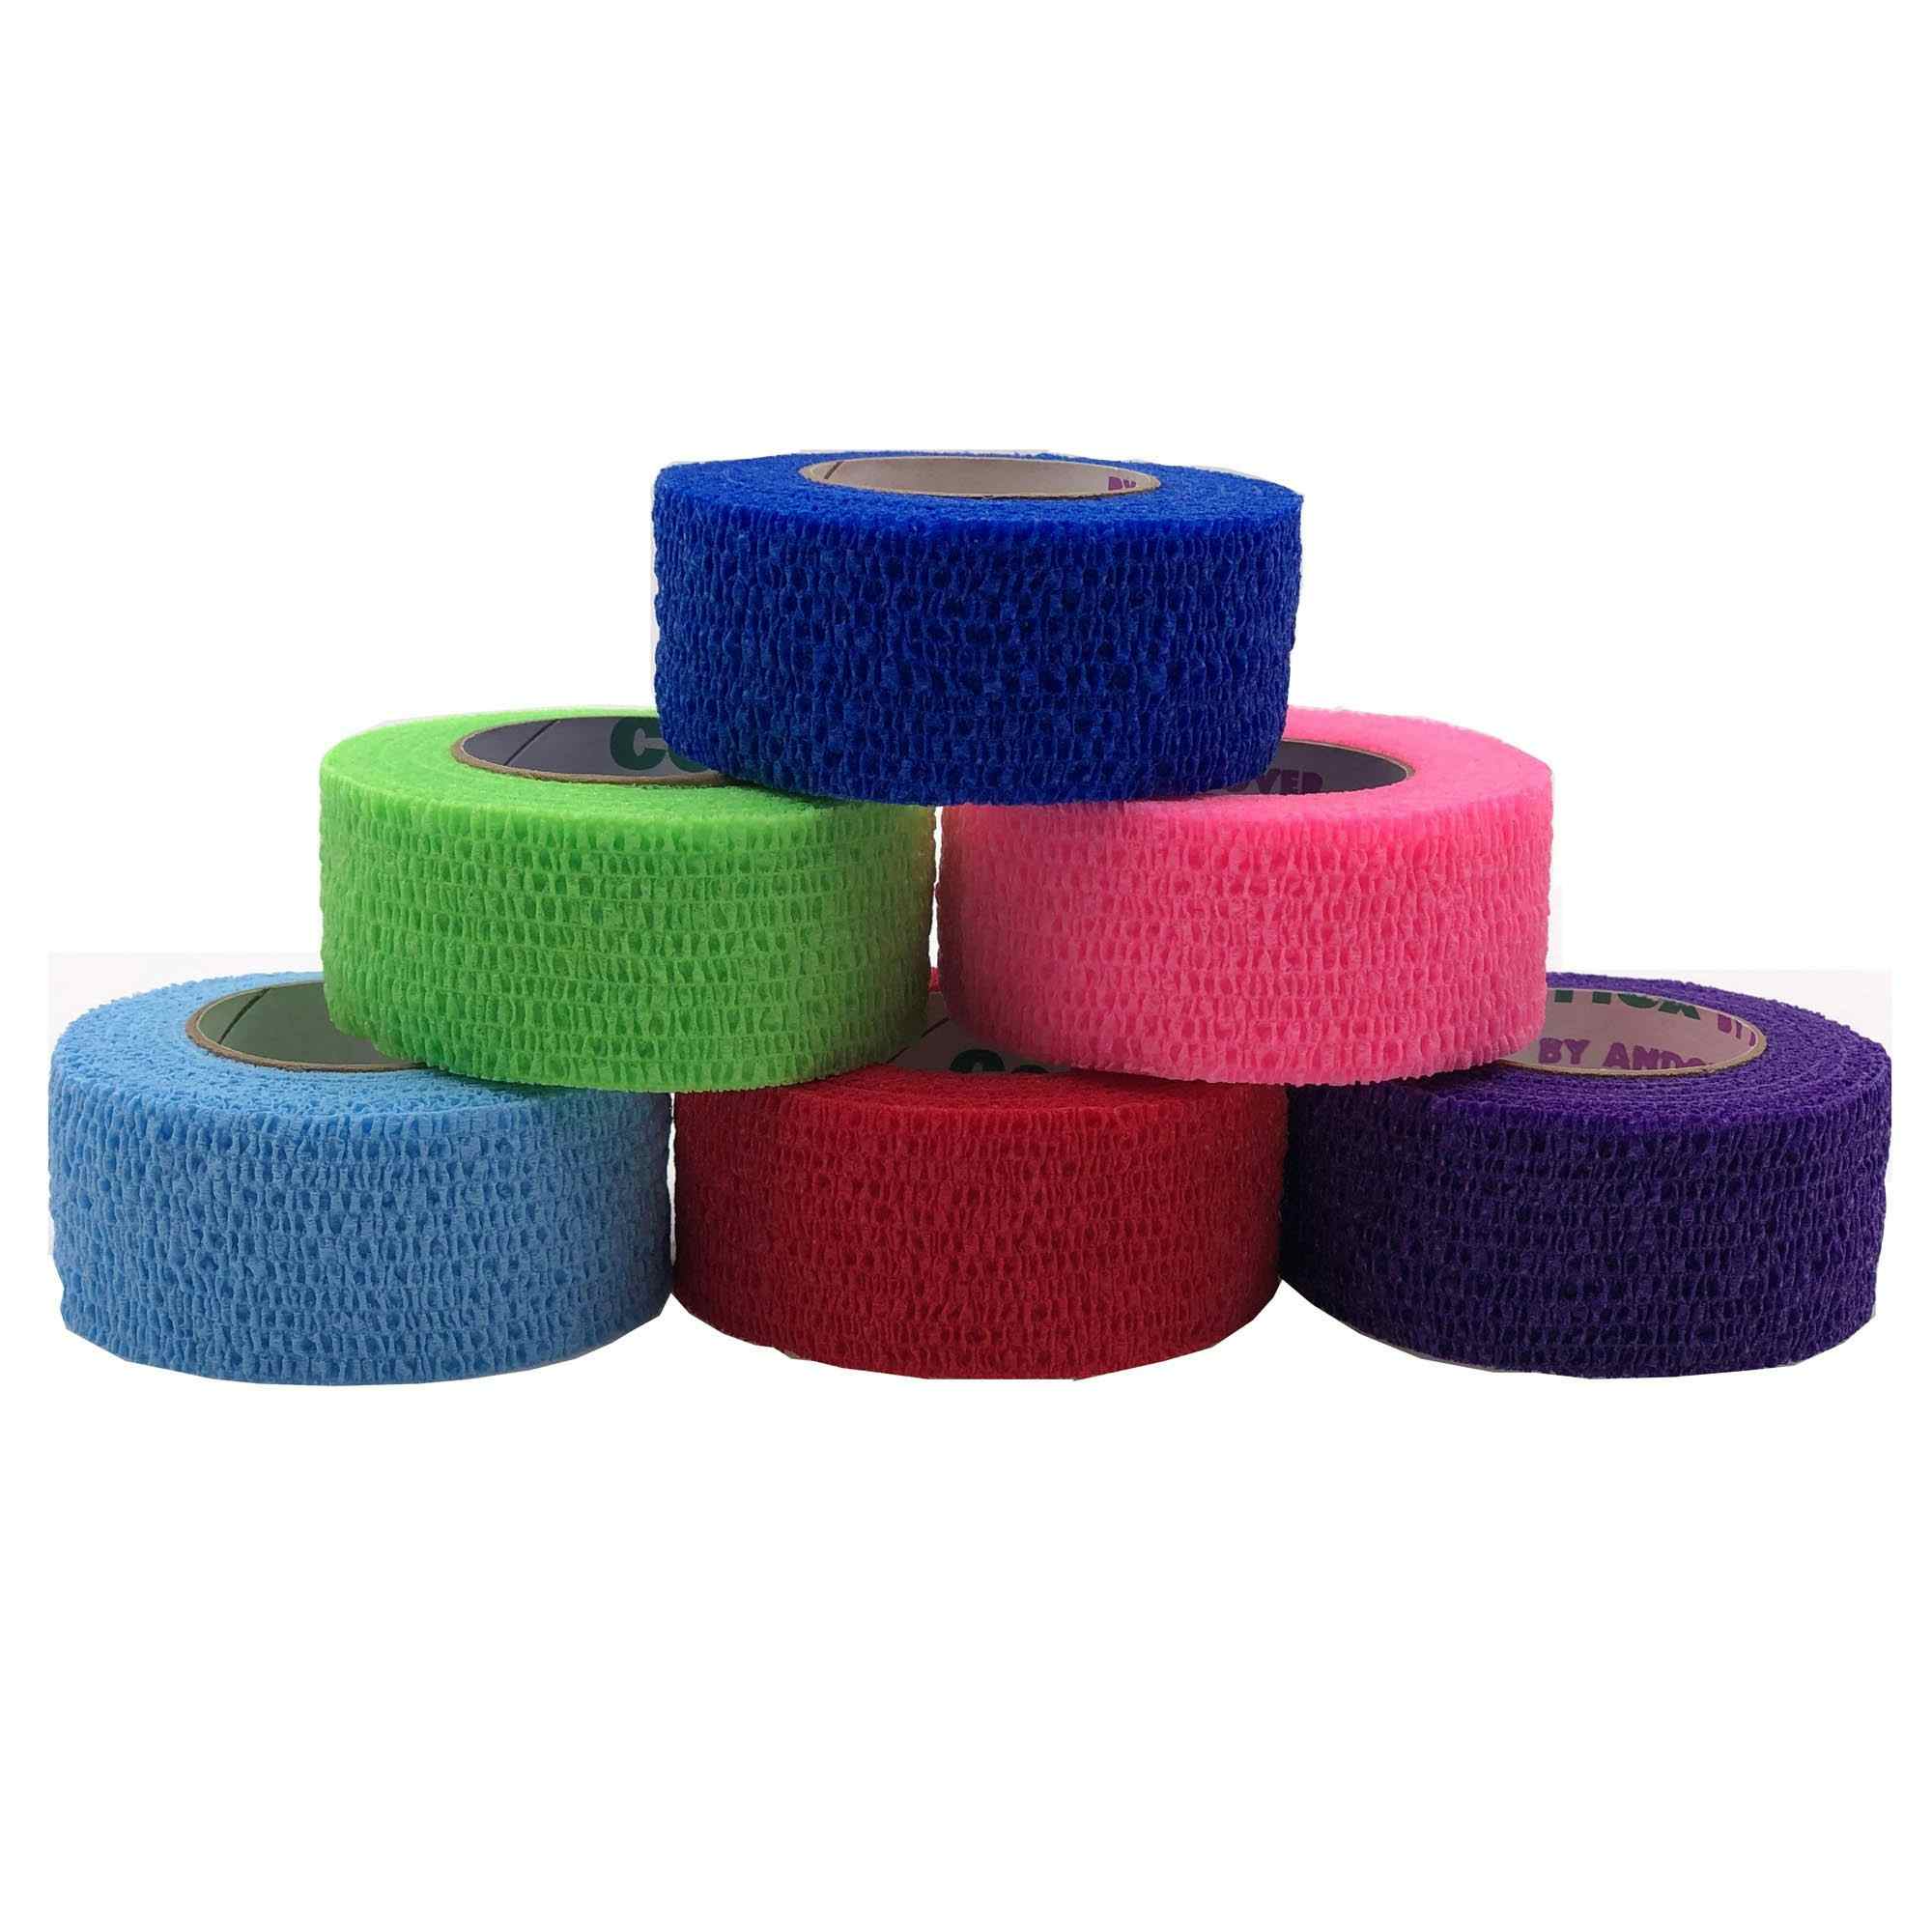 Andover Coated Products CoFlex Med Cohesive Bandage, Multiple Colors, 2" x 5 yds